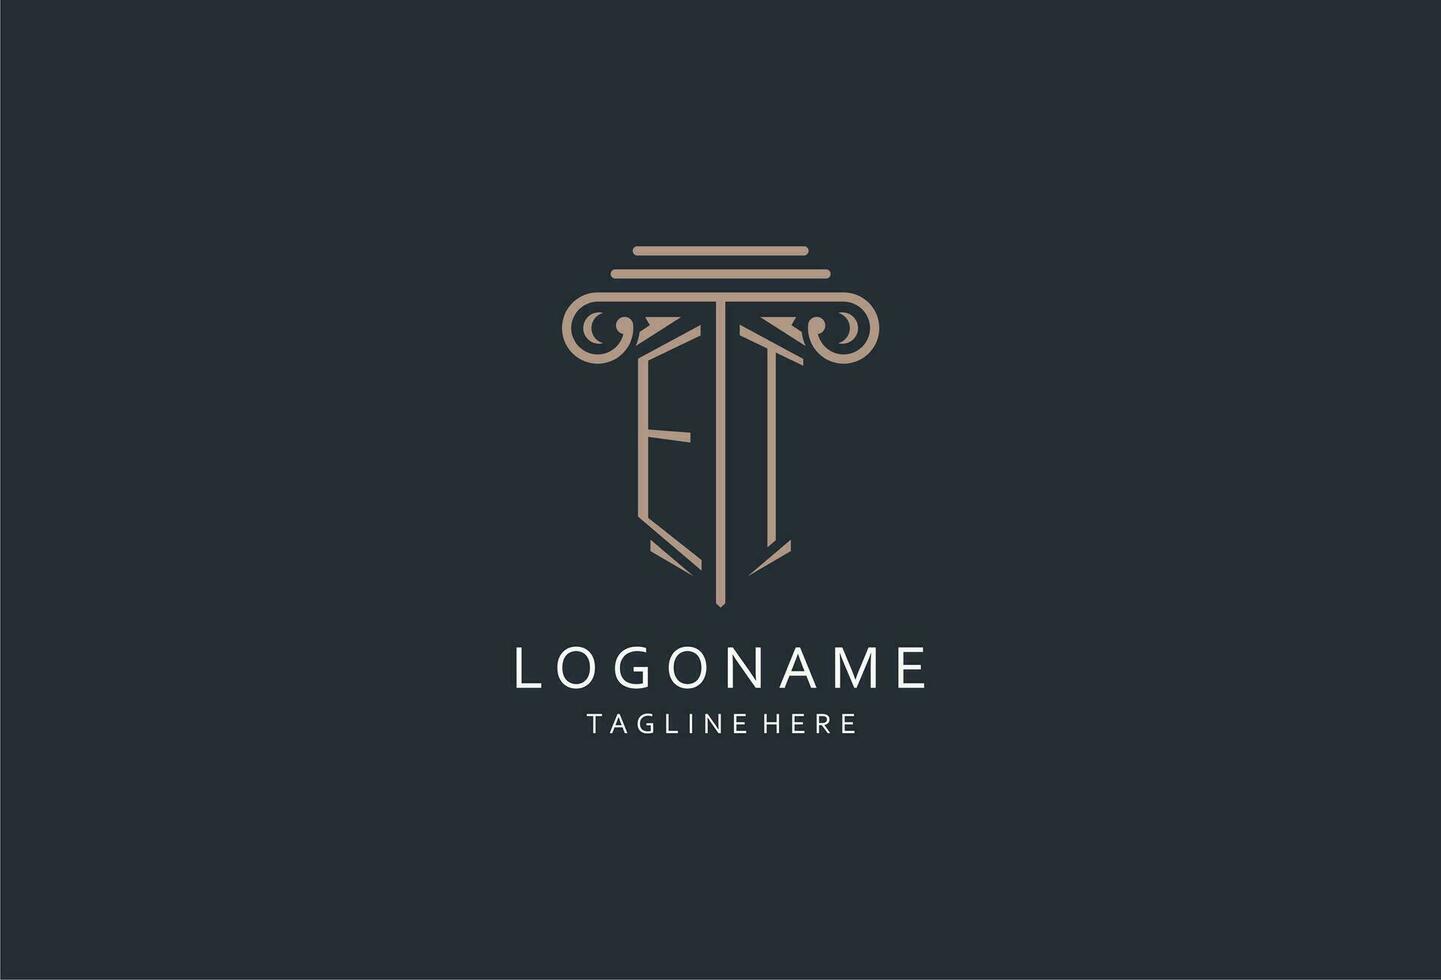 ET monogram logo with pillar shape icon, luxury and elegant design logo for law firm initial style logo vector